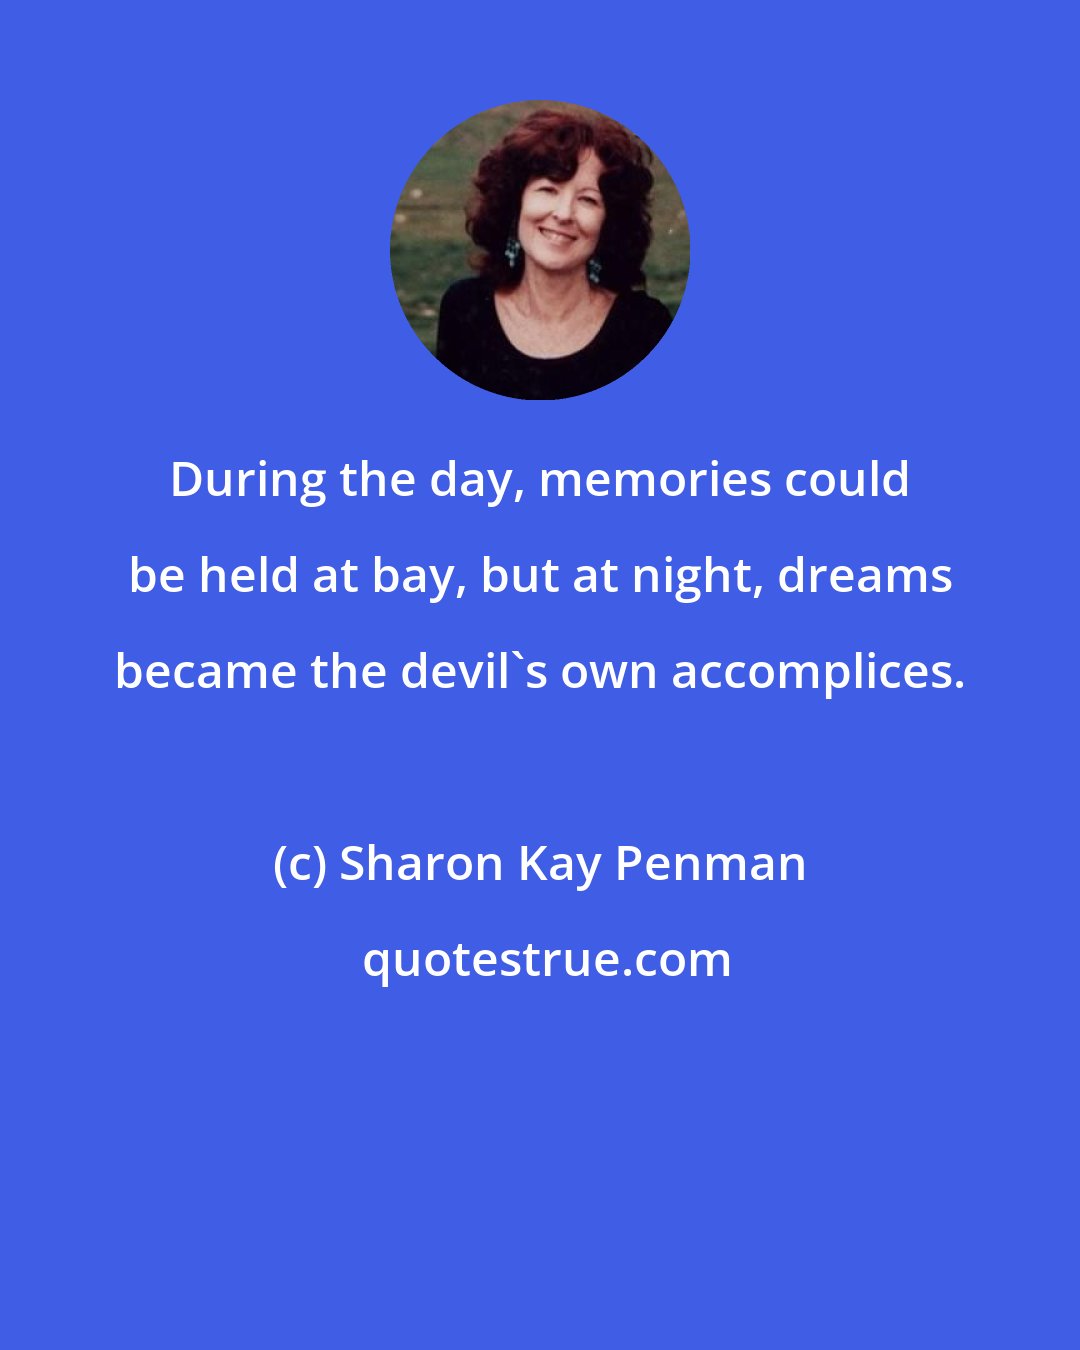 Sharon Kay Penman: During the day, memories could be held at bay, but at night, dreams became the devil's own accomplices.